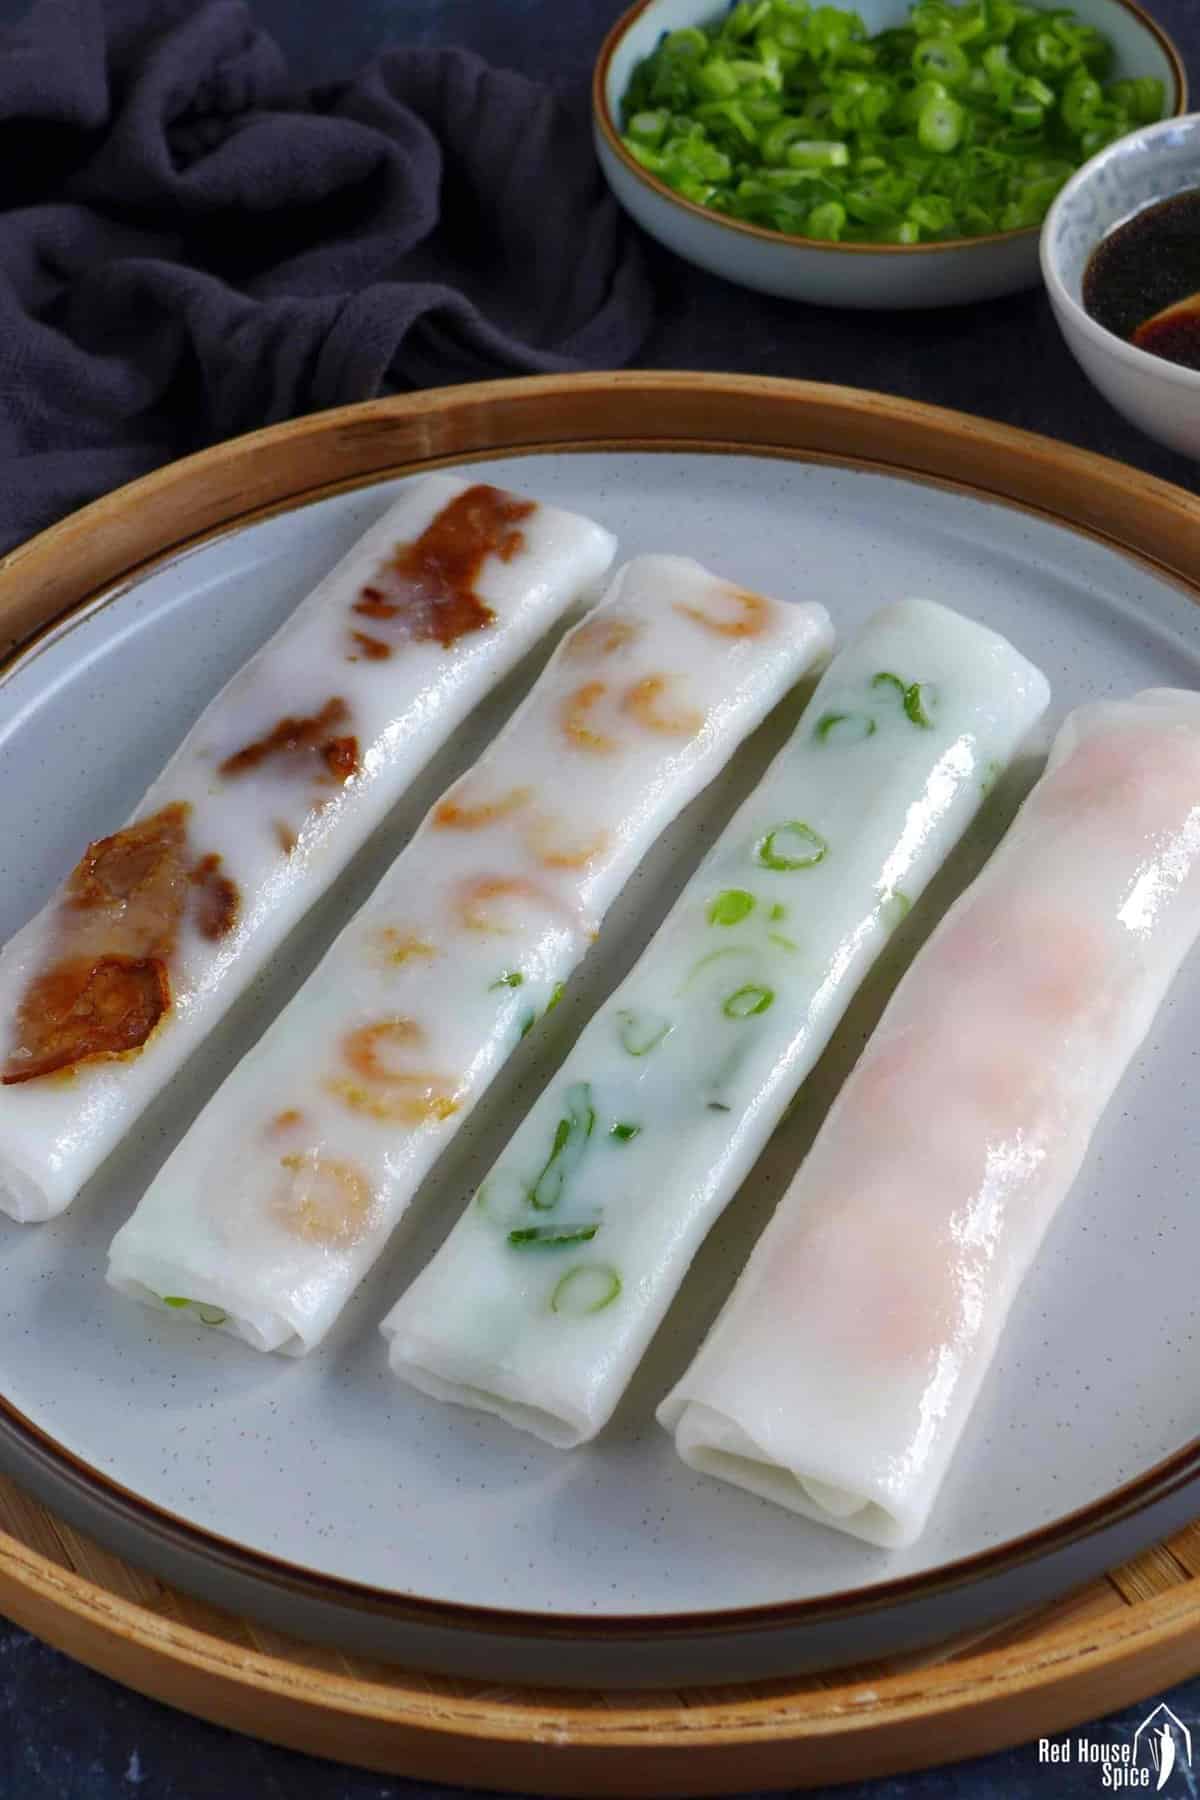 four rolls of Cheung fun with different fillings